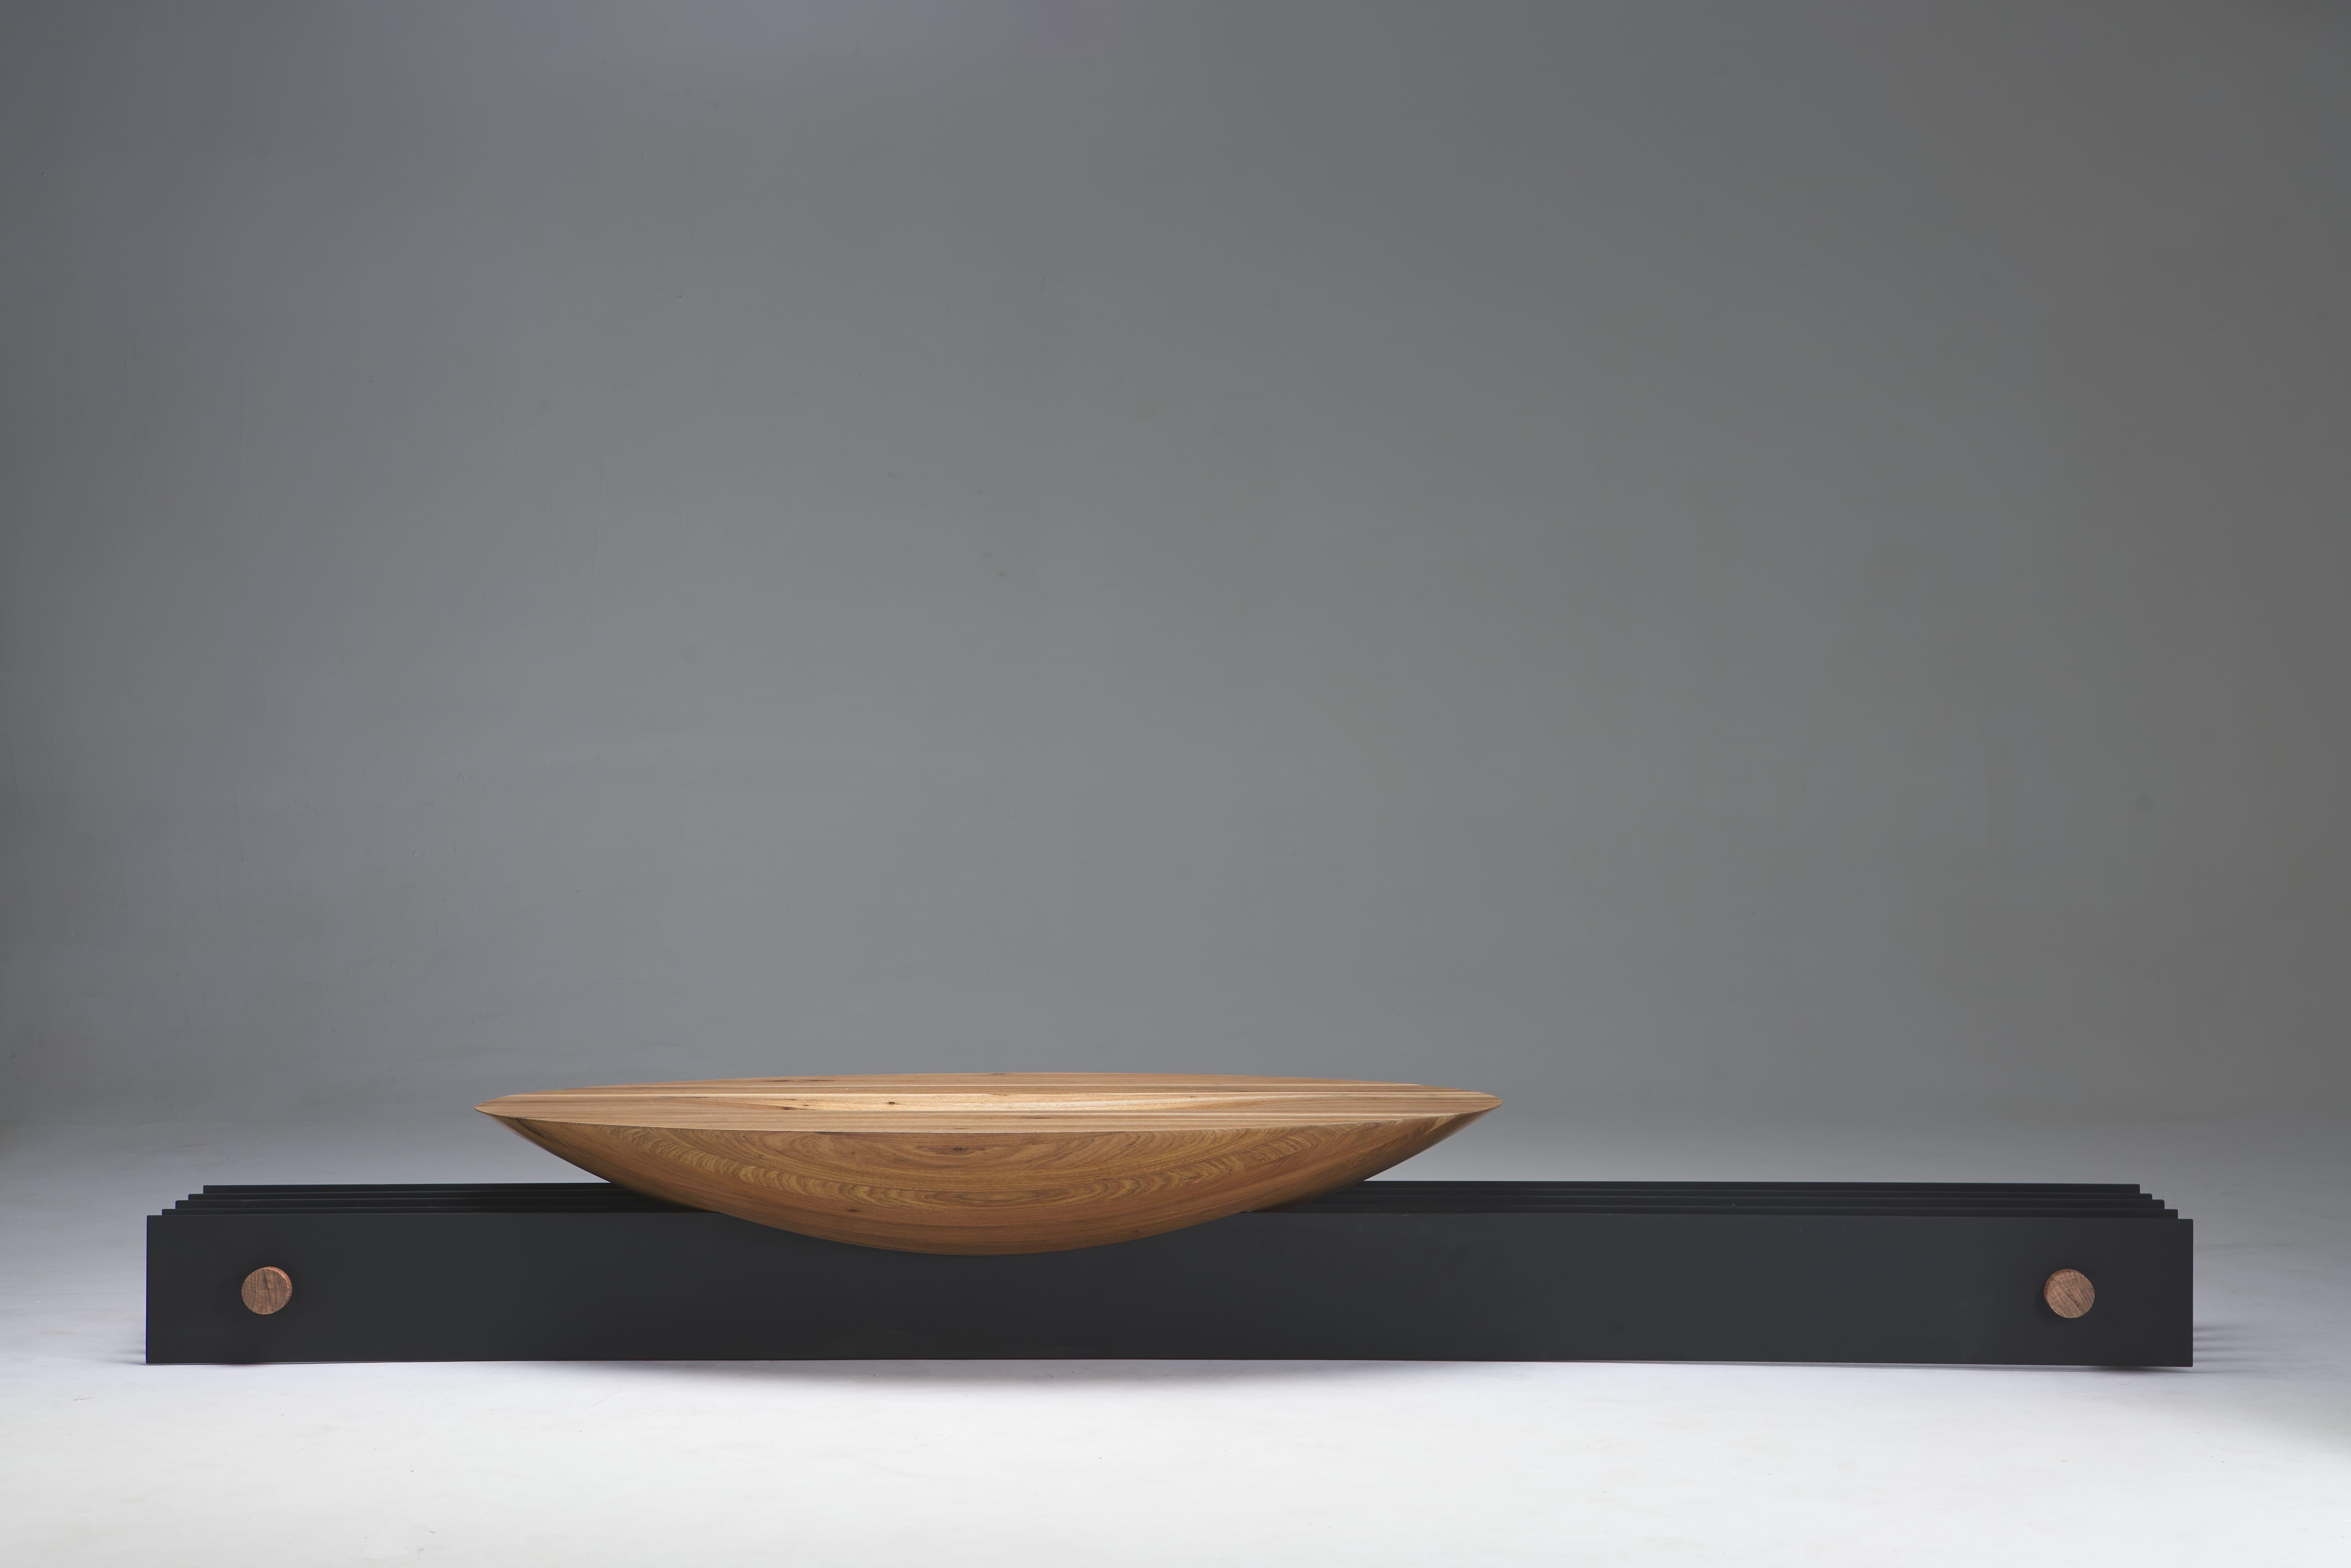 This work of art was made following the lines of the artist Andre Ferri, who blends aluminum and wood in a harmonious way.
Always thinking of new ways to connect with the environment, Andre created a bench that stands out with the robustness of wood